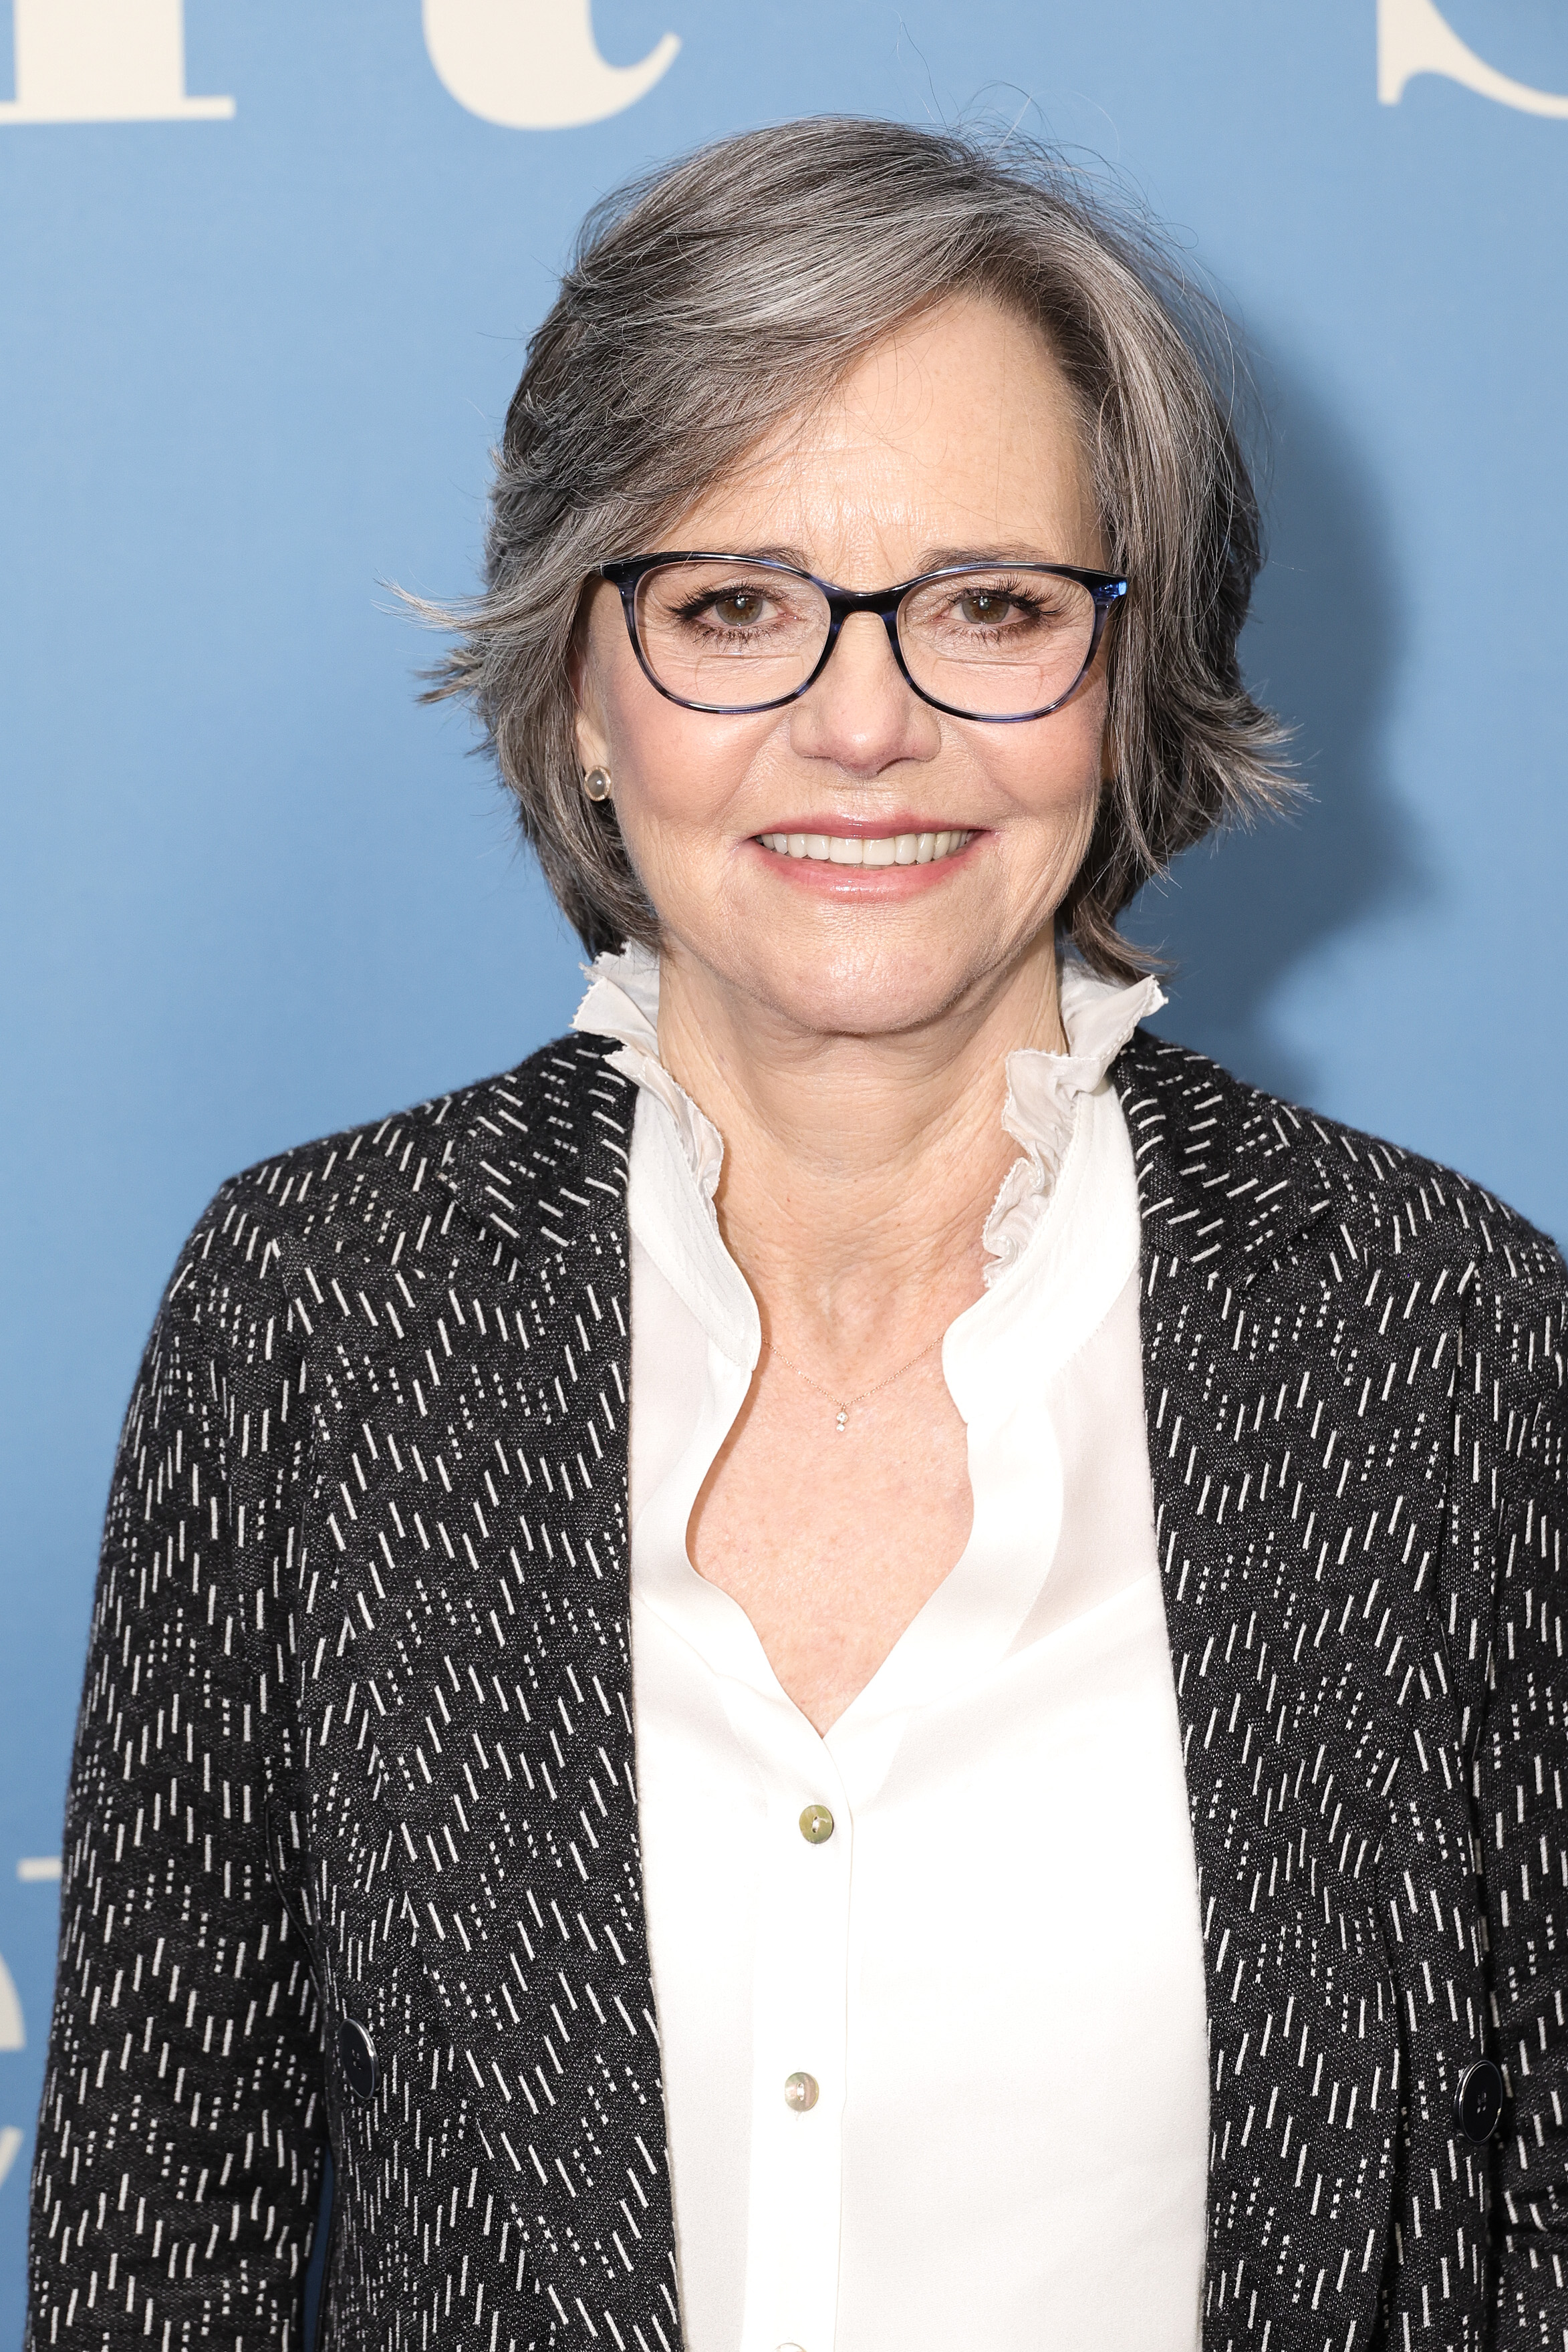 Sally Field at the "Spoiler Alert" premiere in New York City, 2022 | Source: Getty Images